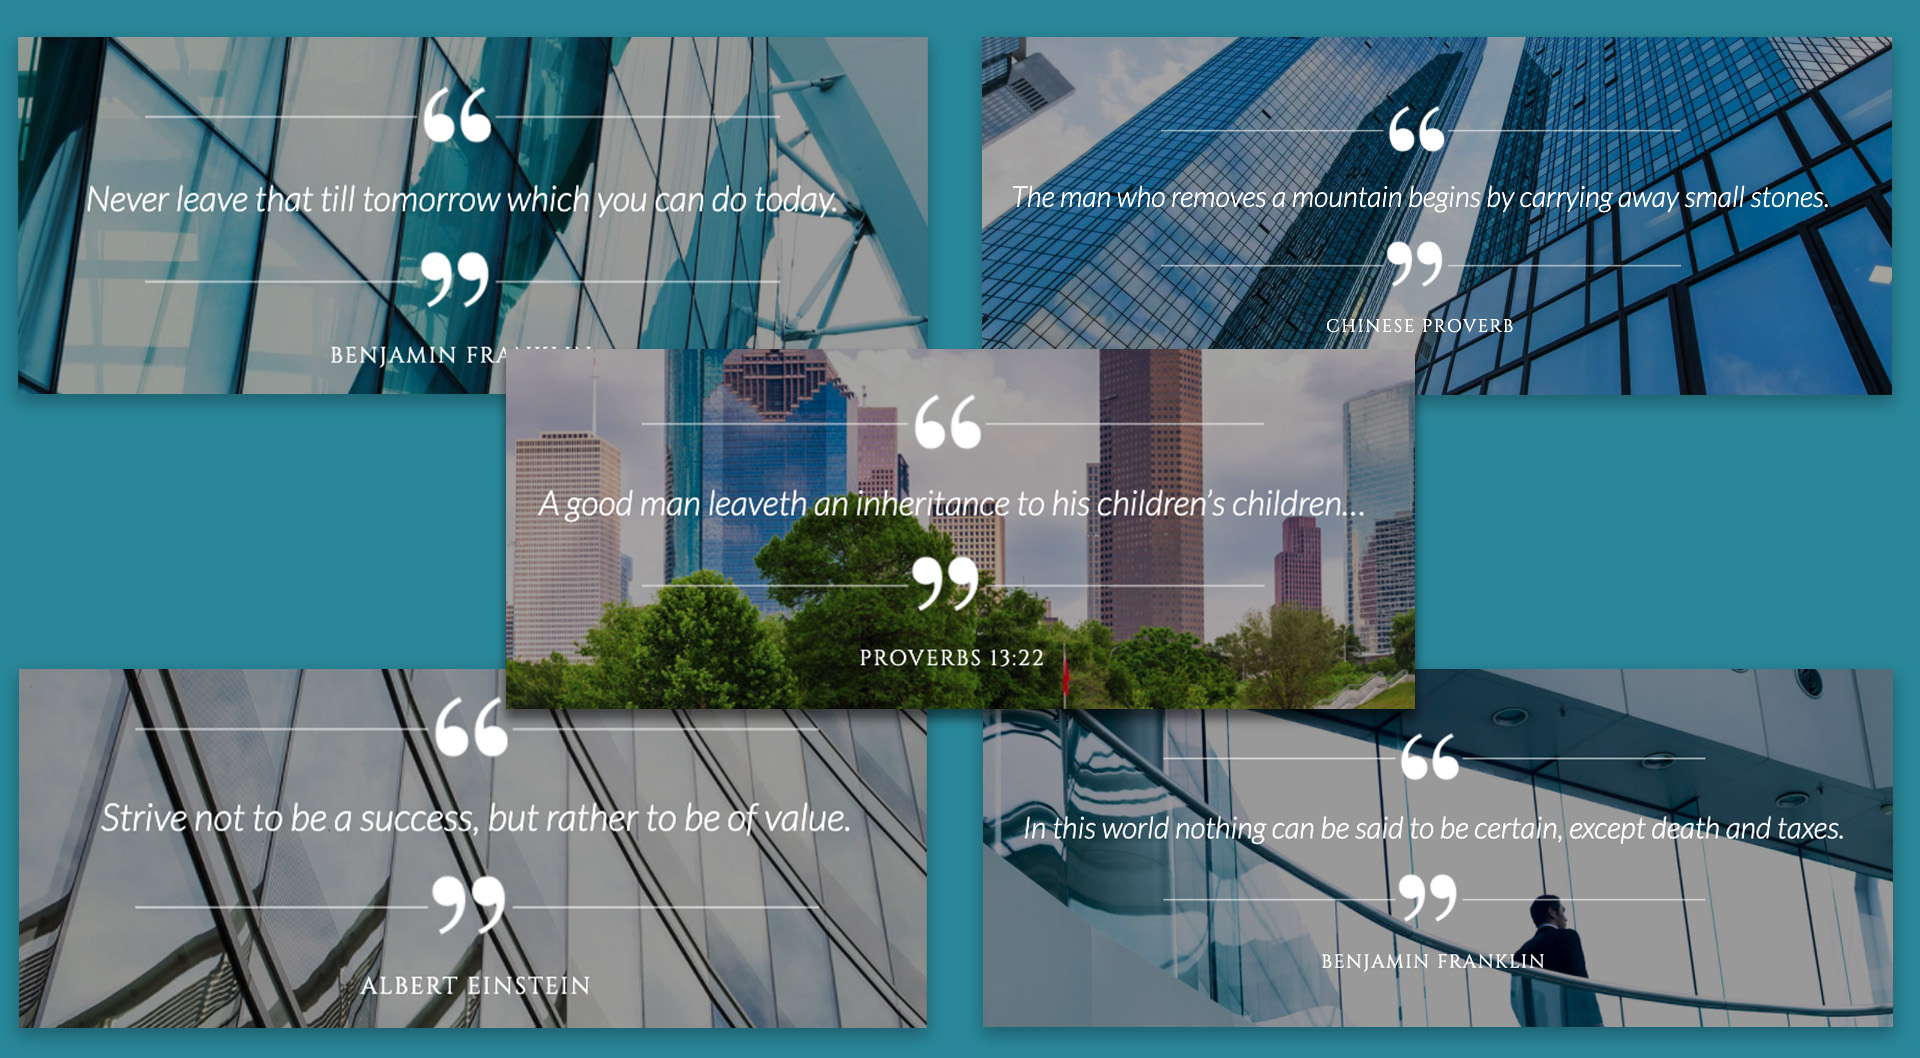 Gib's personality was highlighted throughout the site through the use of strategically-placed quotes.